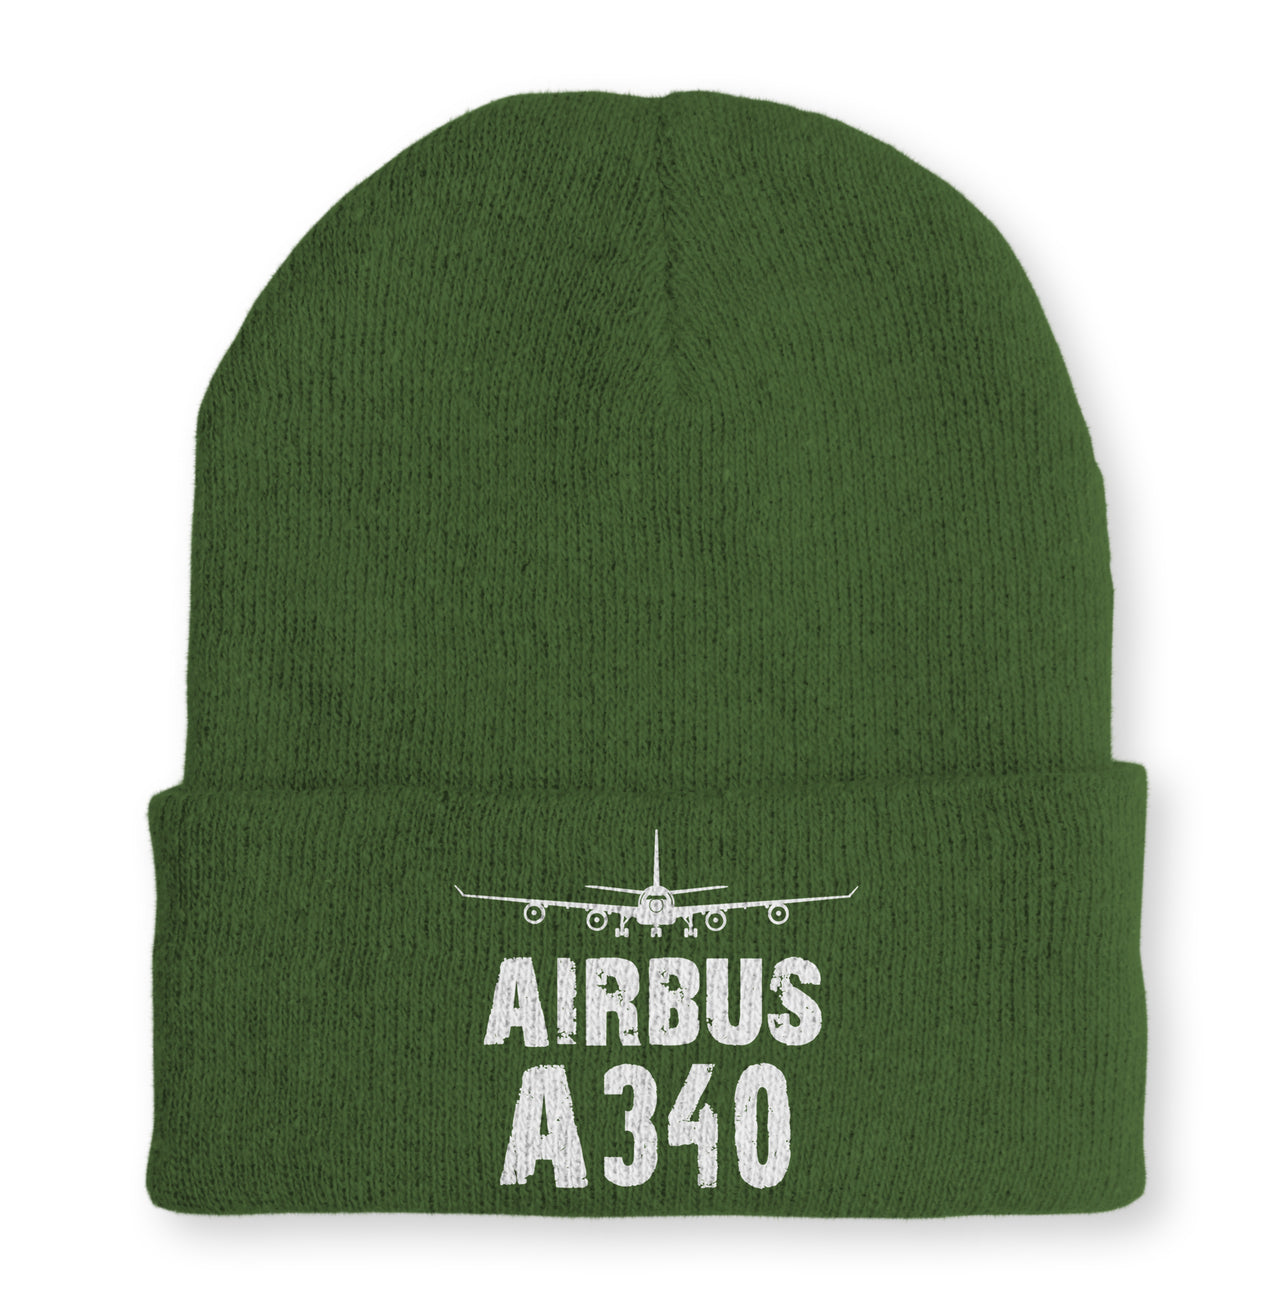 Airbus A340 & Plane Embroidered Beanies